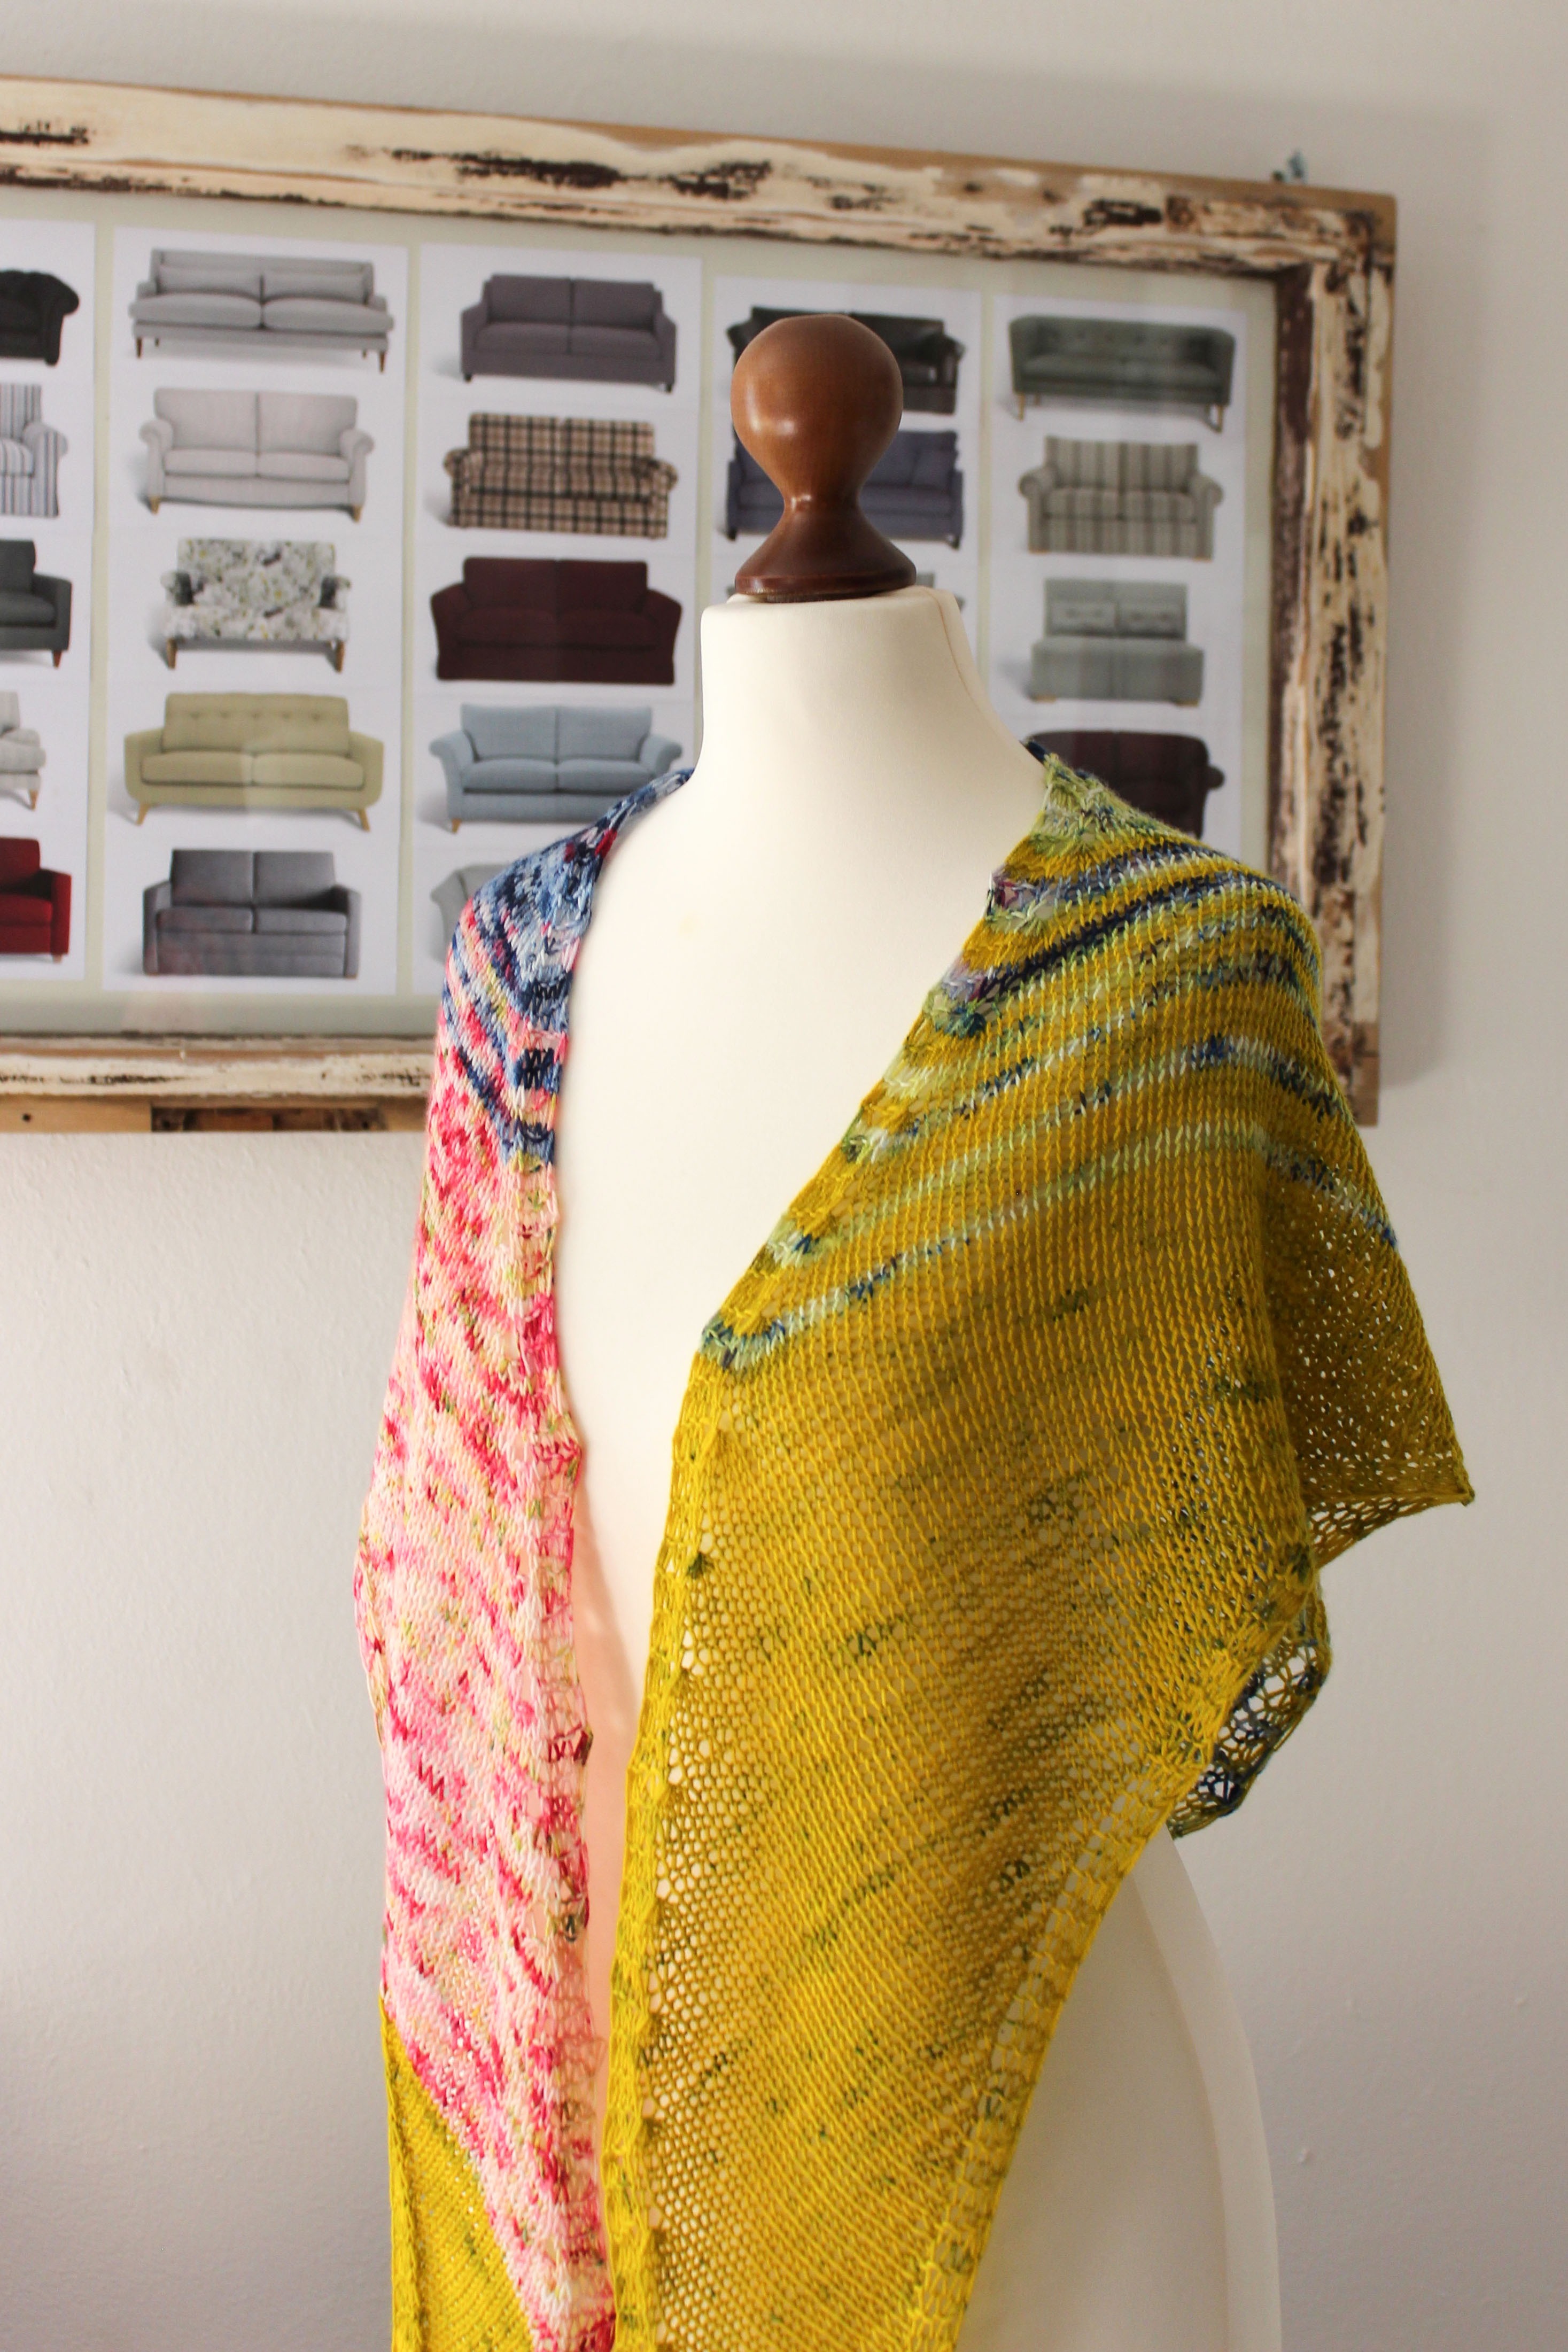 Spring Cleaning shawl knitting pattern by Julia Riede